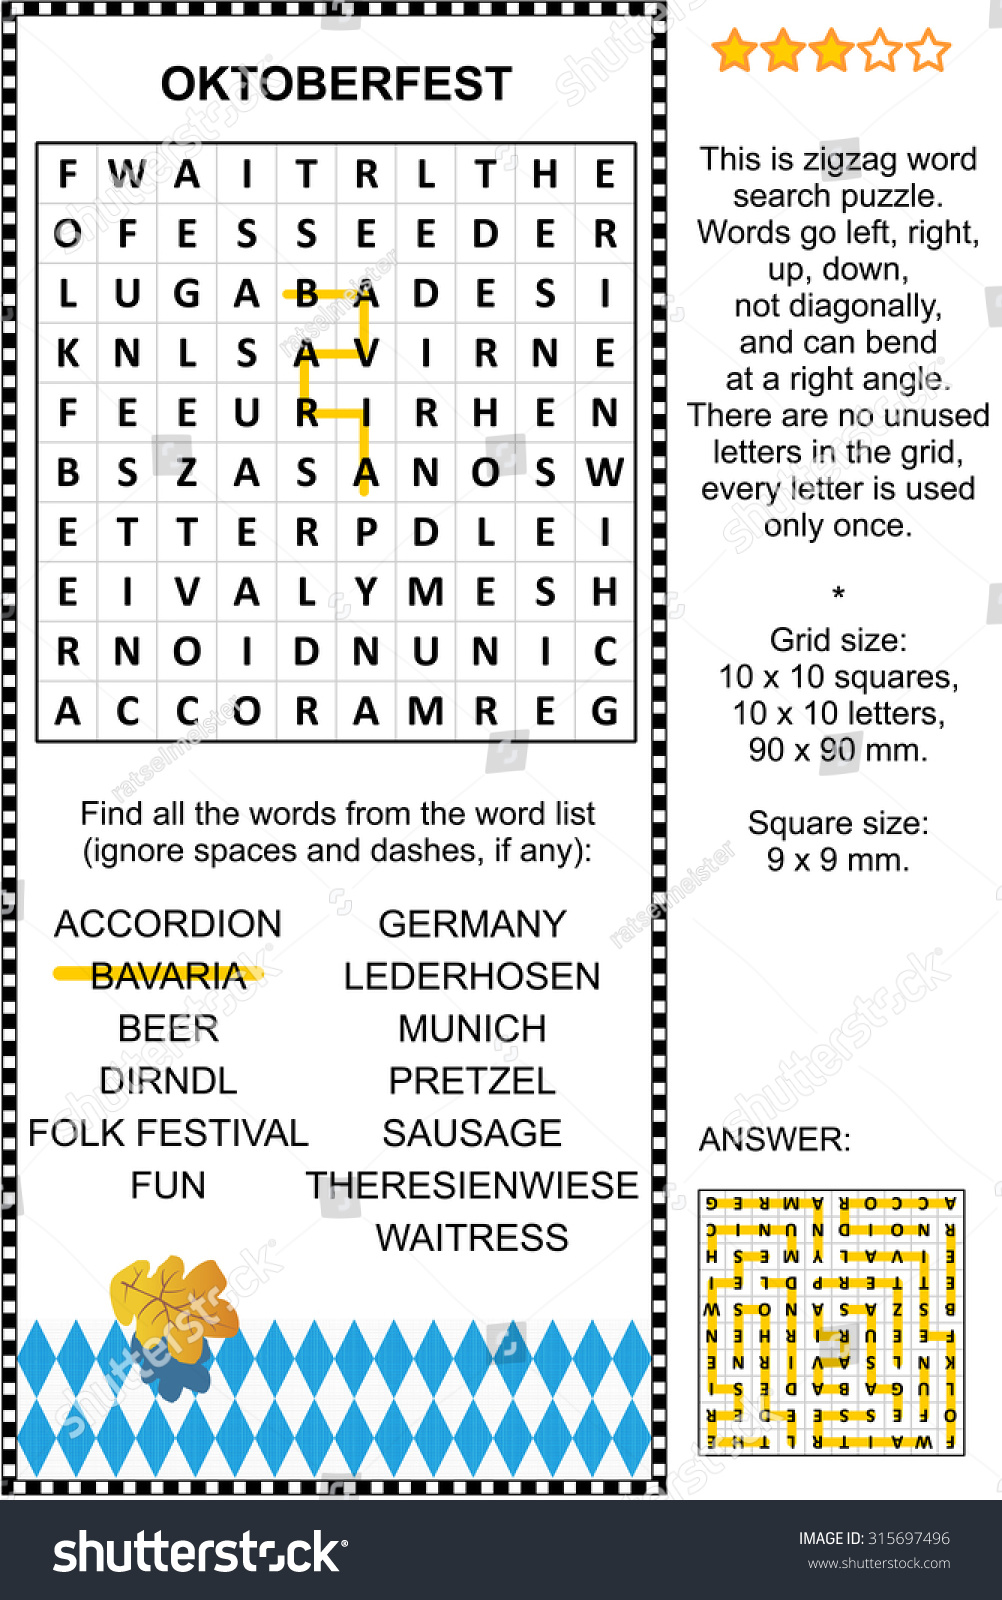 Oktoberfest themed word search puzzle (english - Royalty Free Stock ...